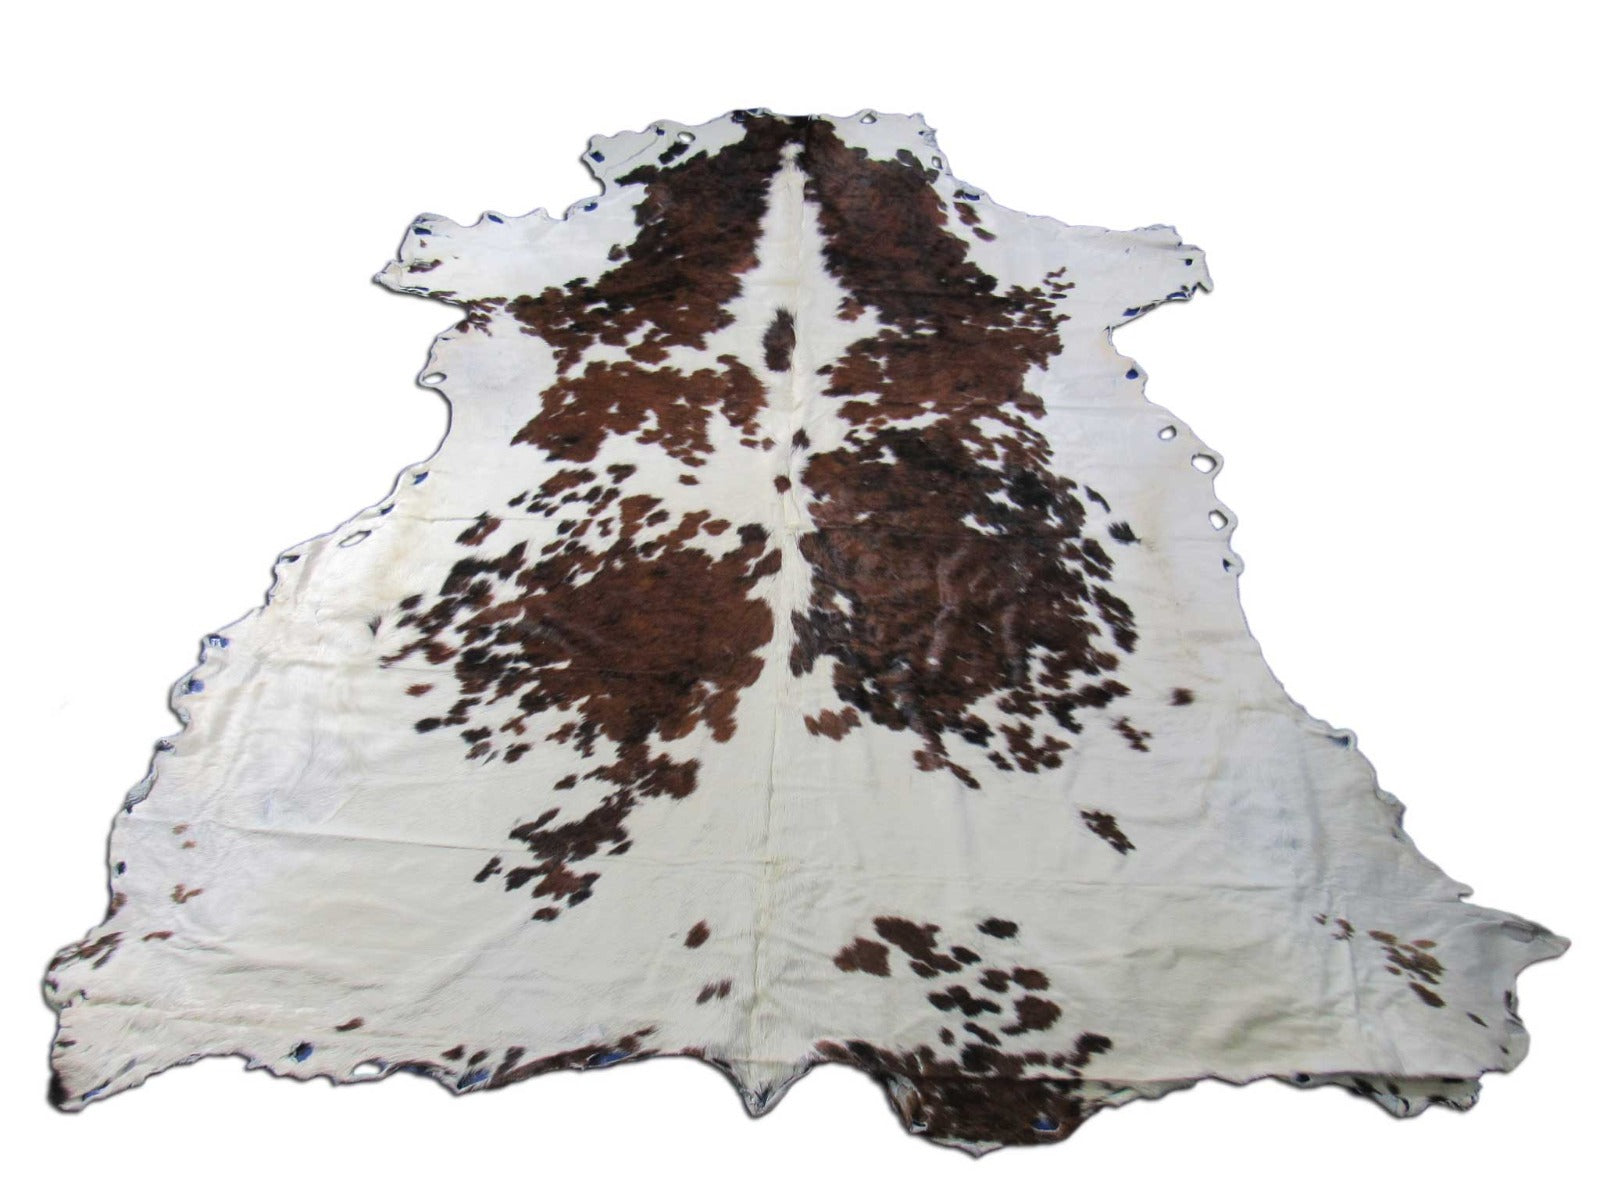 Speckled Tricolor Cowhide Rug (untrimmed) - Size: 8x8 feet M-1538